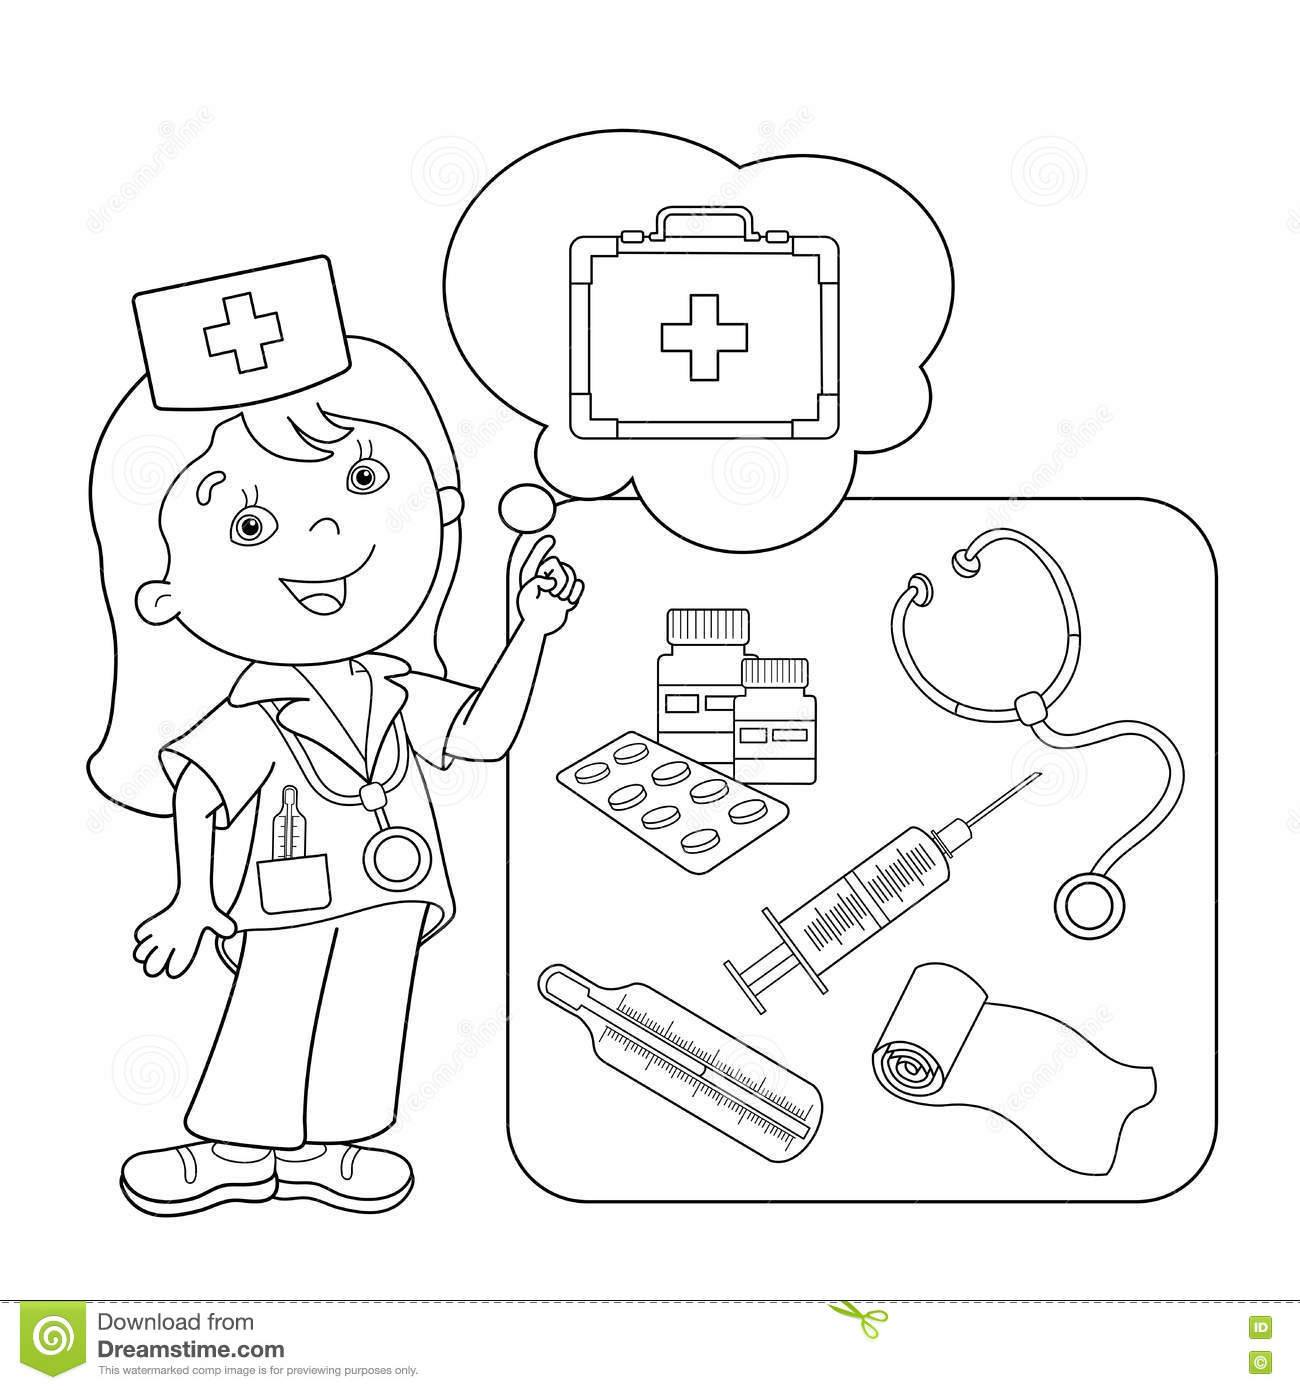 Medical Coloring Sheets For Kids
 Coloring Page Outline Cartoon Doctor With First Aid Kit